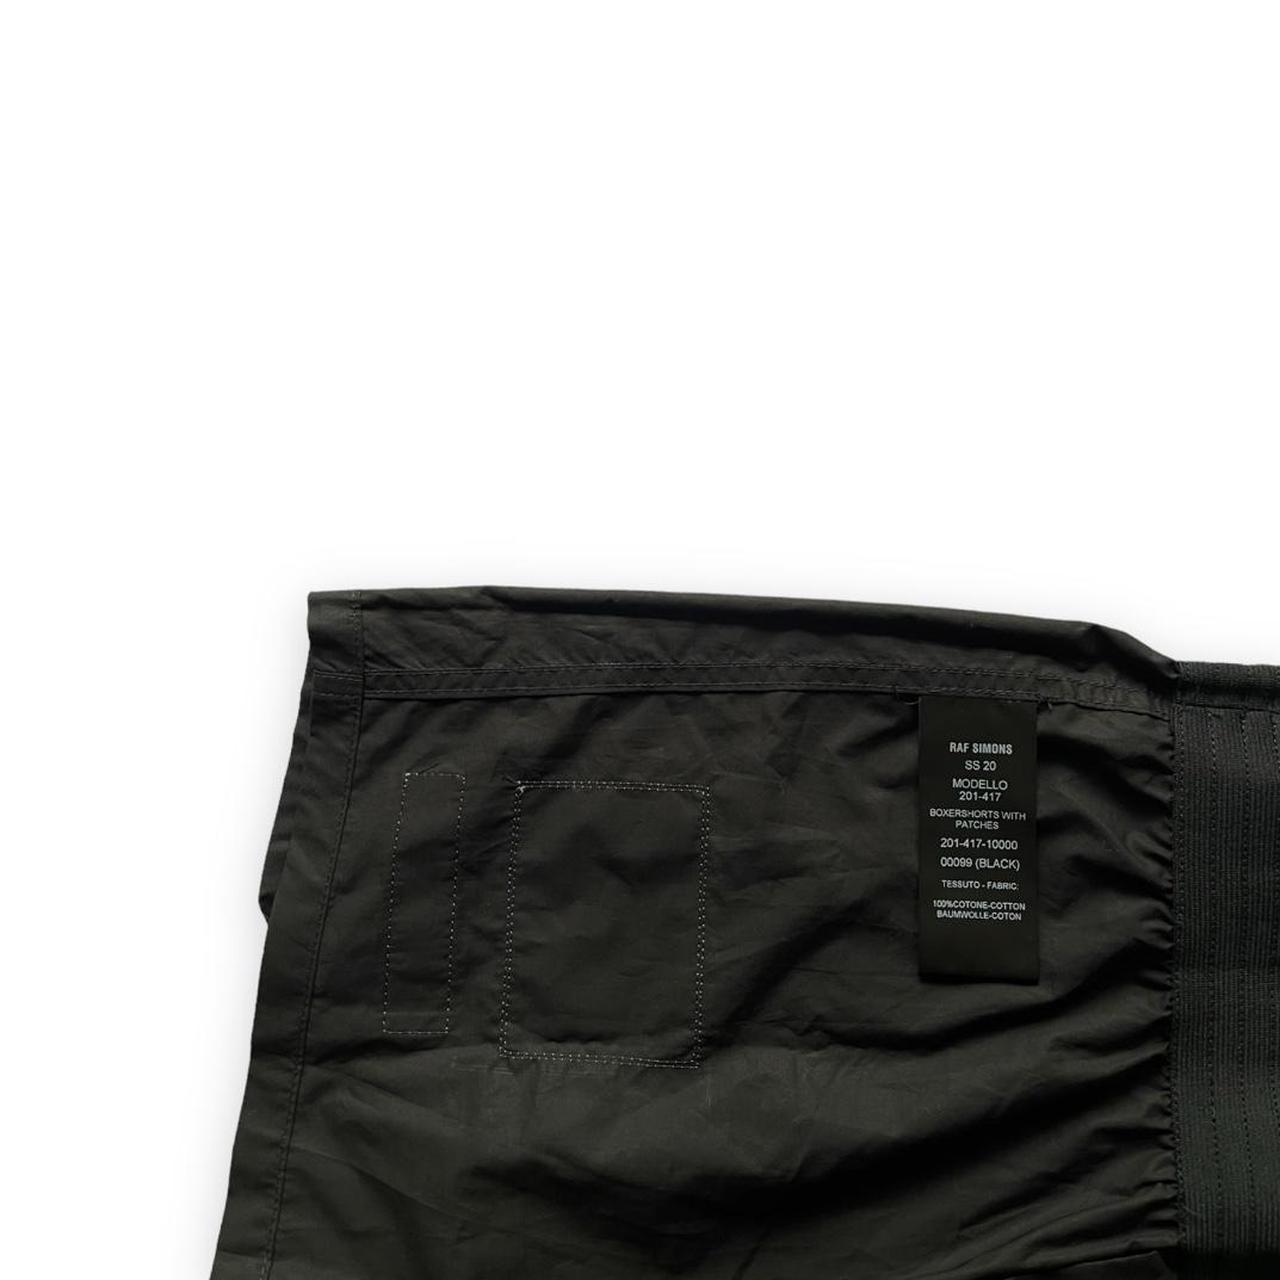 Raf Simons S/S 20 Patched Boxer Shorts, Size M best...